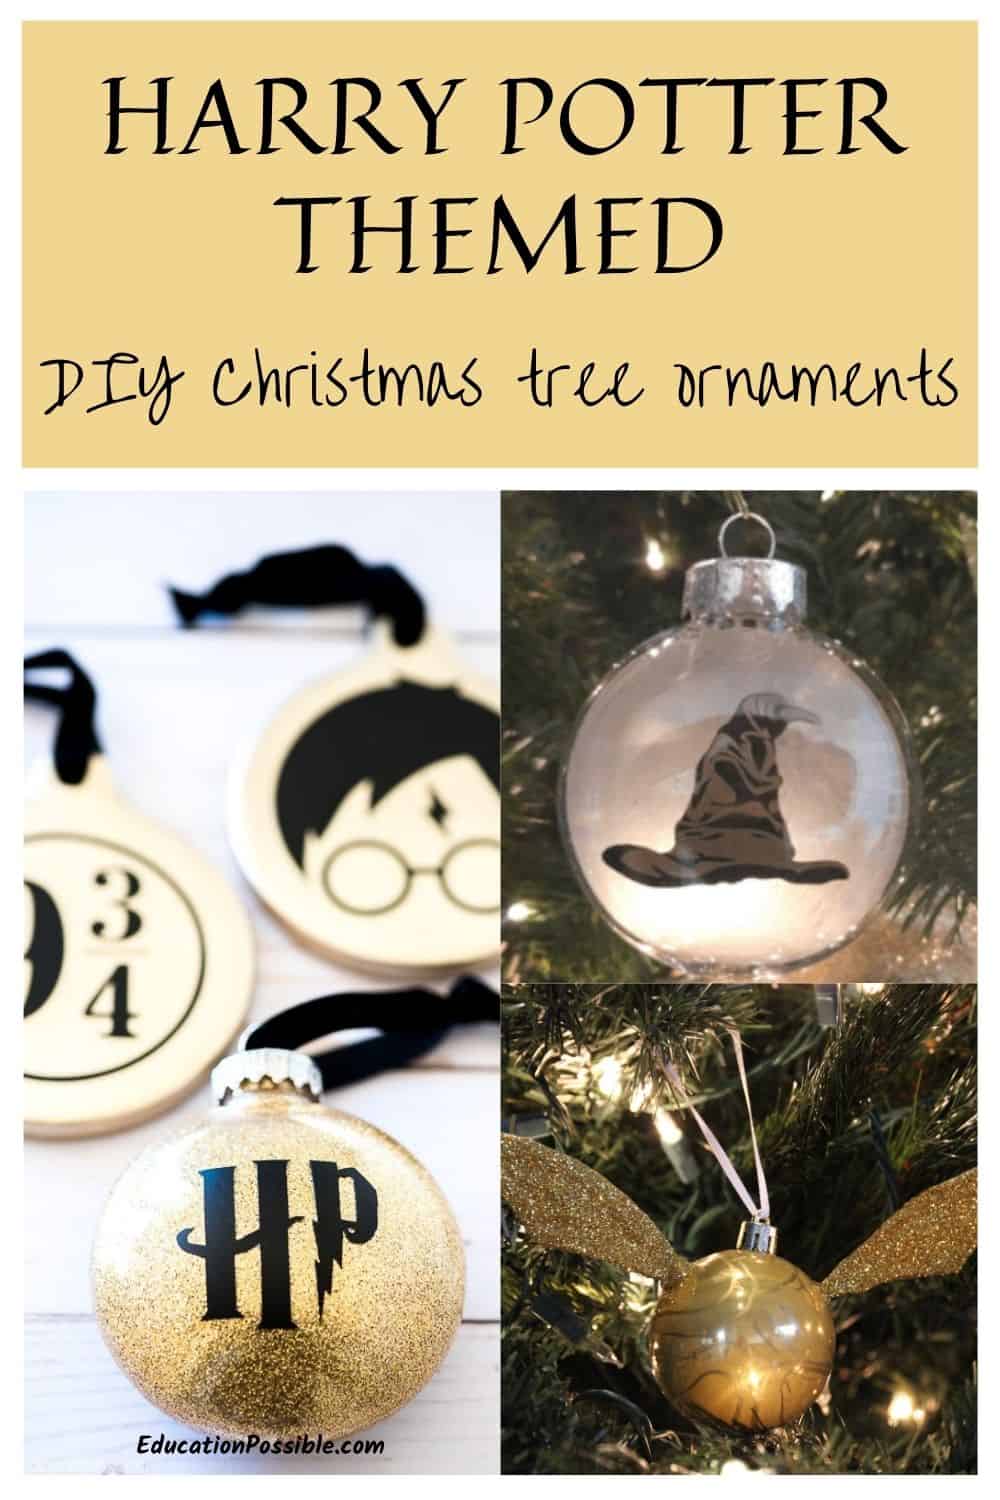 collage of 3 homemade Harry Potter ornaments. 2 balls with symbols and one golden snitch